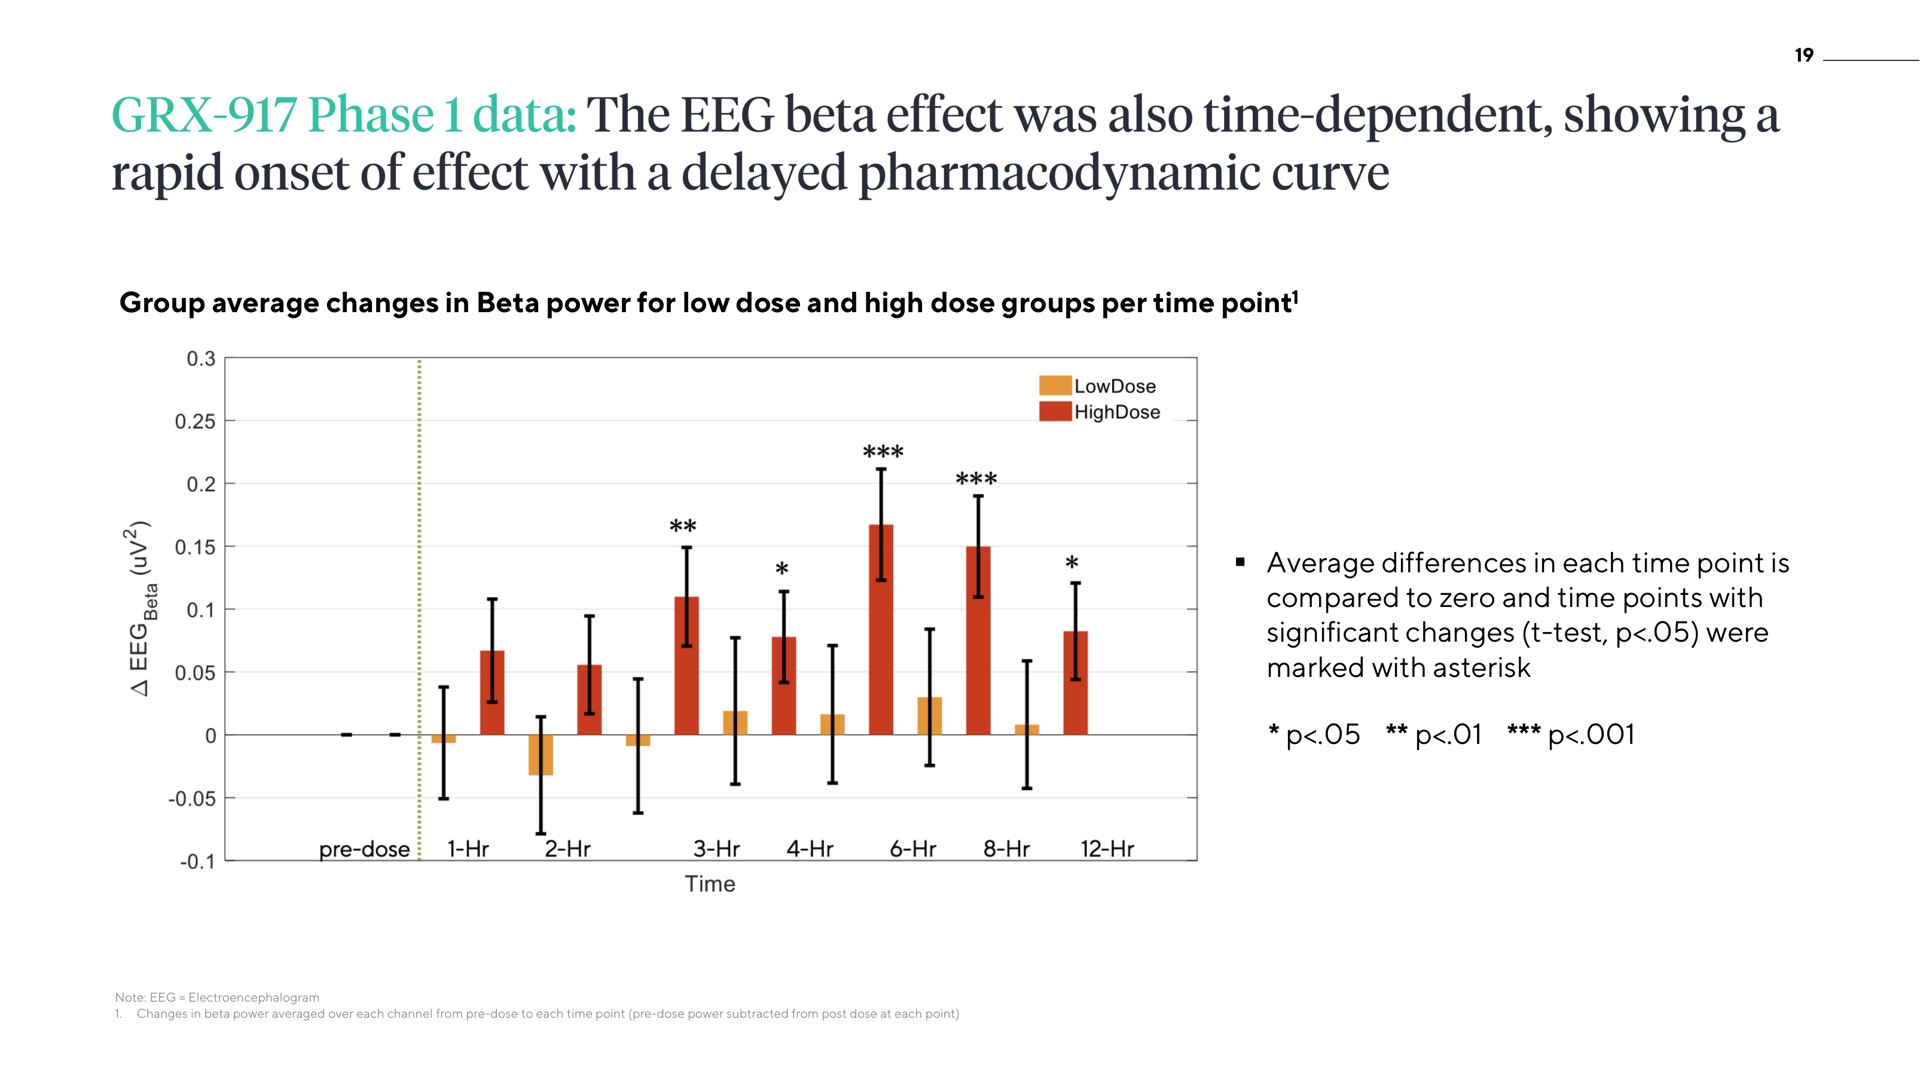 group average changes in beta power for low dose and high dose groups per time point average differences in each time point is compared to zero and time points with significant changes test were marked with asterisk phase data the effect was also time dependent showing a rapid onset of effect a delayed pharmacodynamic curve | ATAI